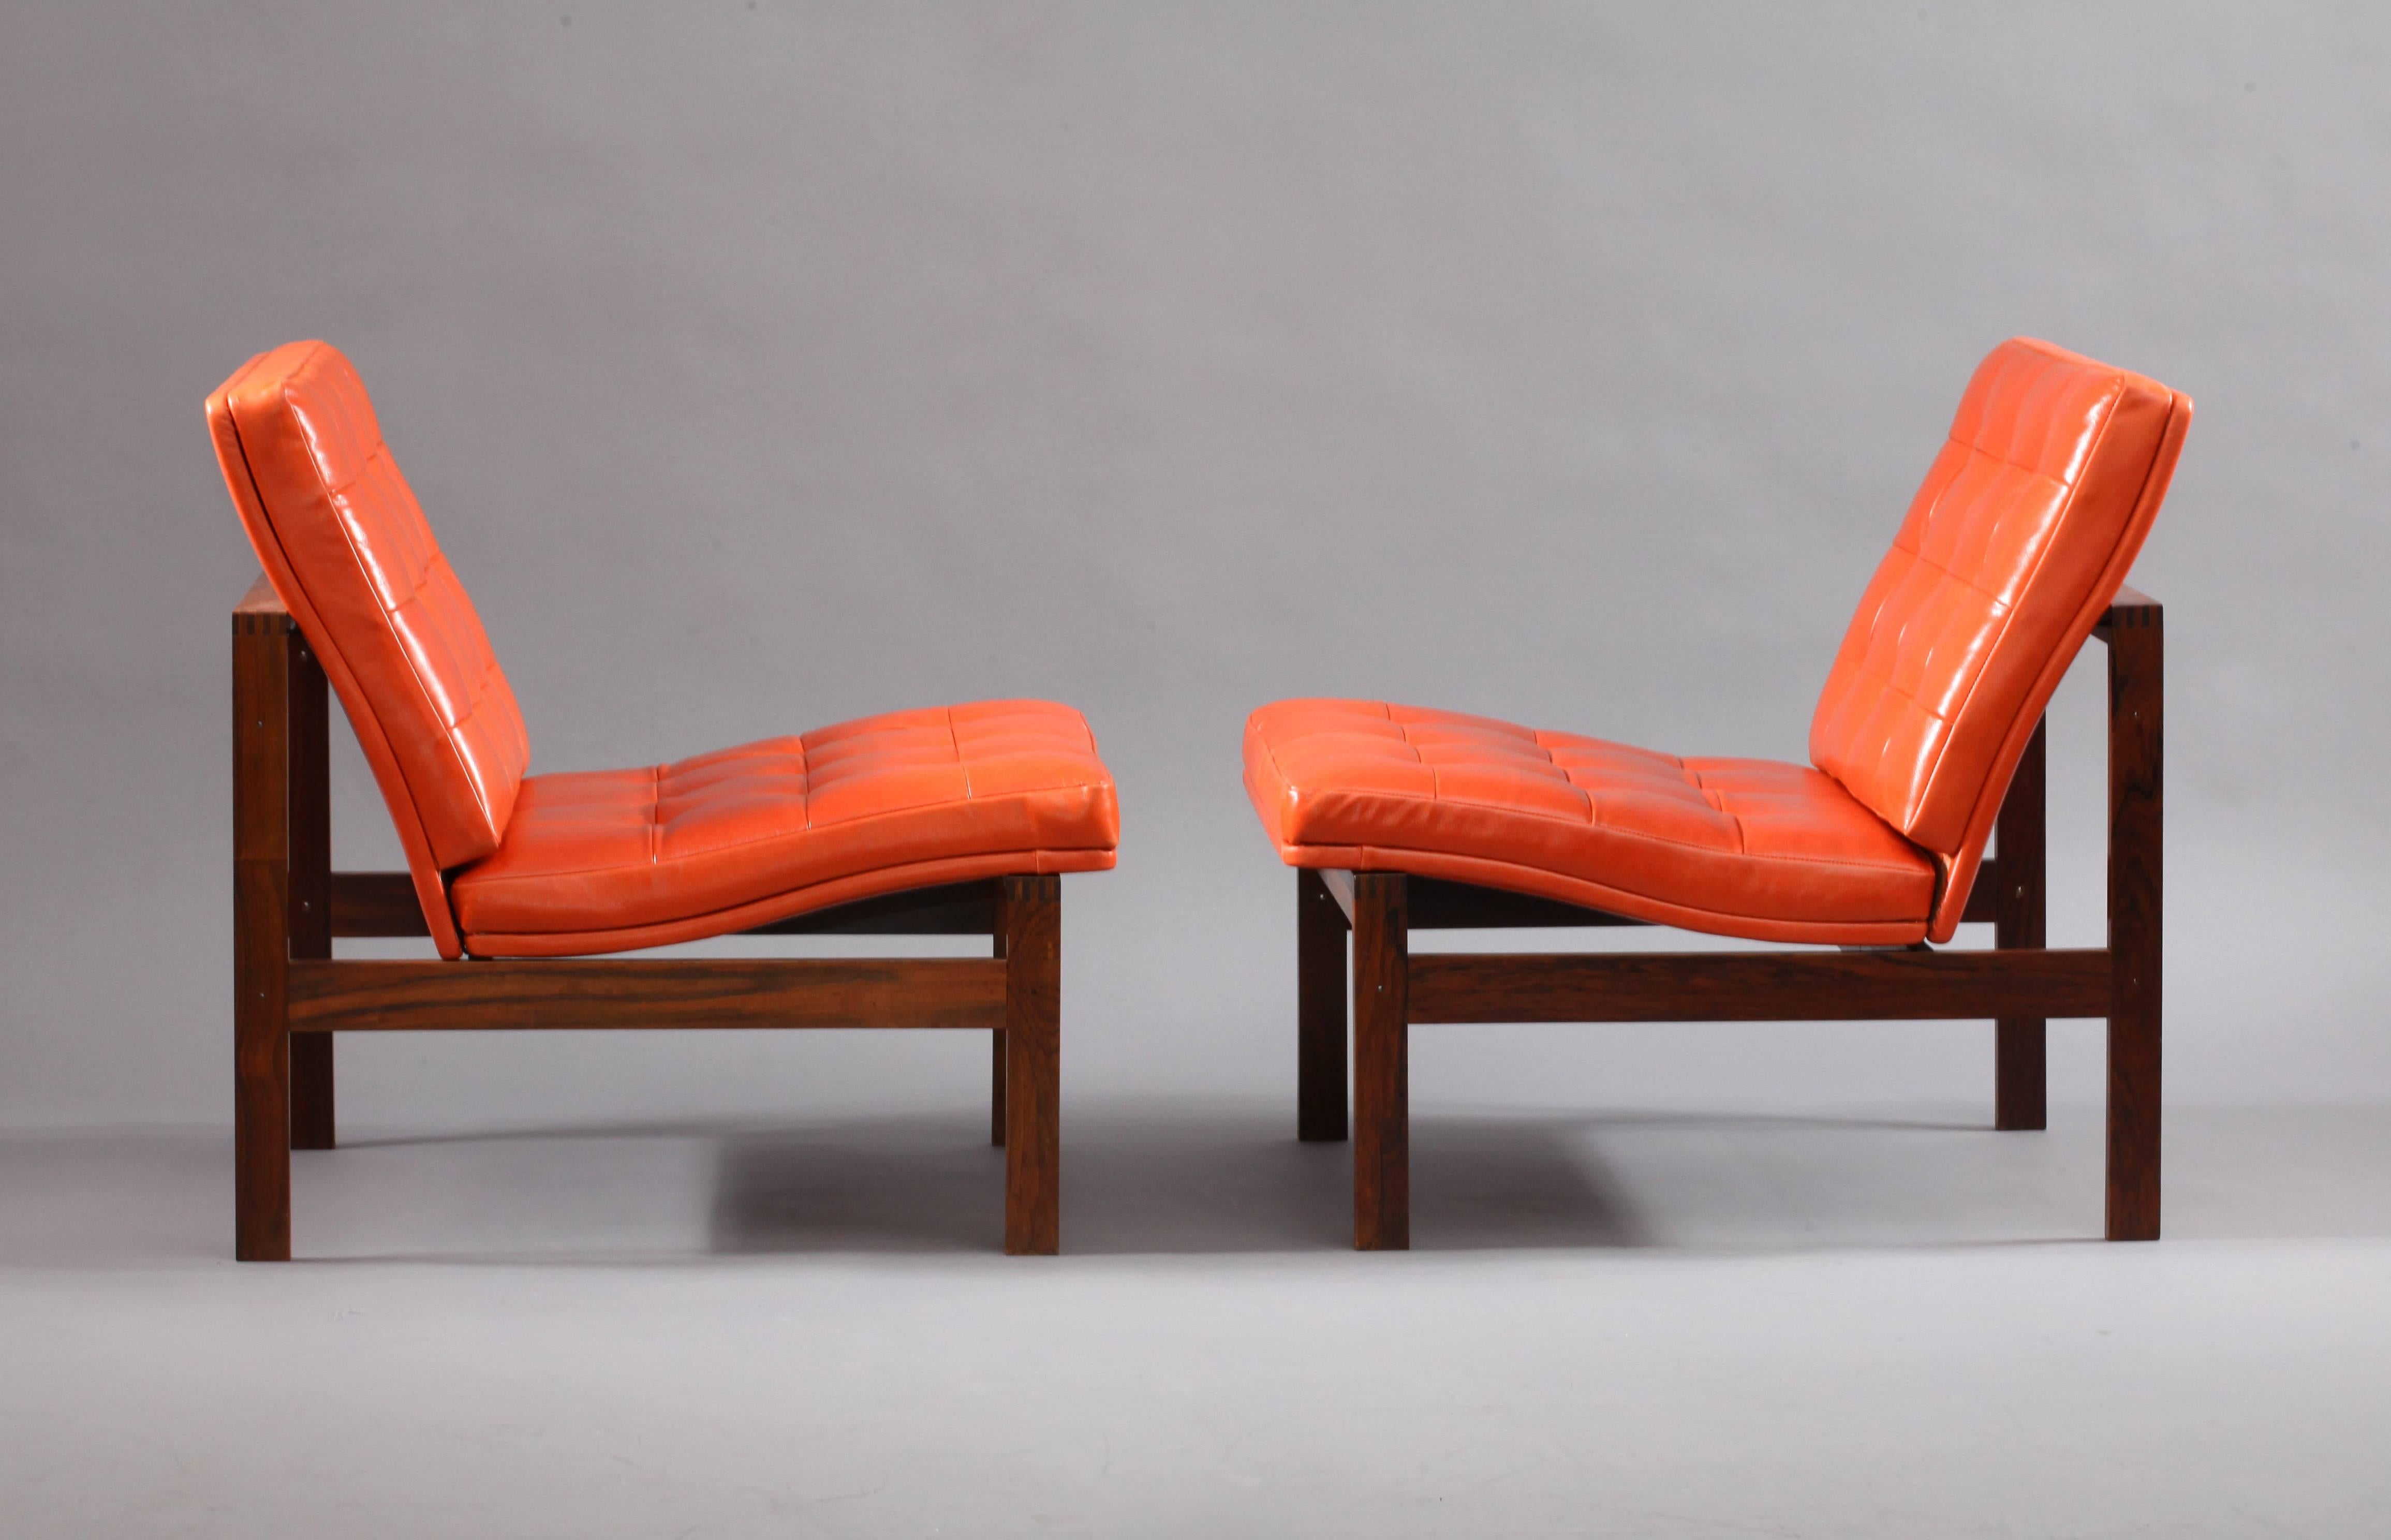 A pair of Danish modular easy chairs designed by Torben Lind and Ole Gjerløv-Knudsen, for France and Son, Denmark, 1974
Rosewood with orange leather upholstery in excellent condition. Seat cushions were removed from the frame.
  